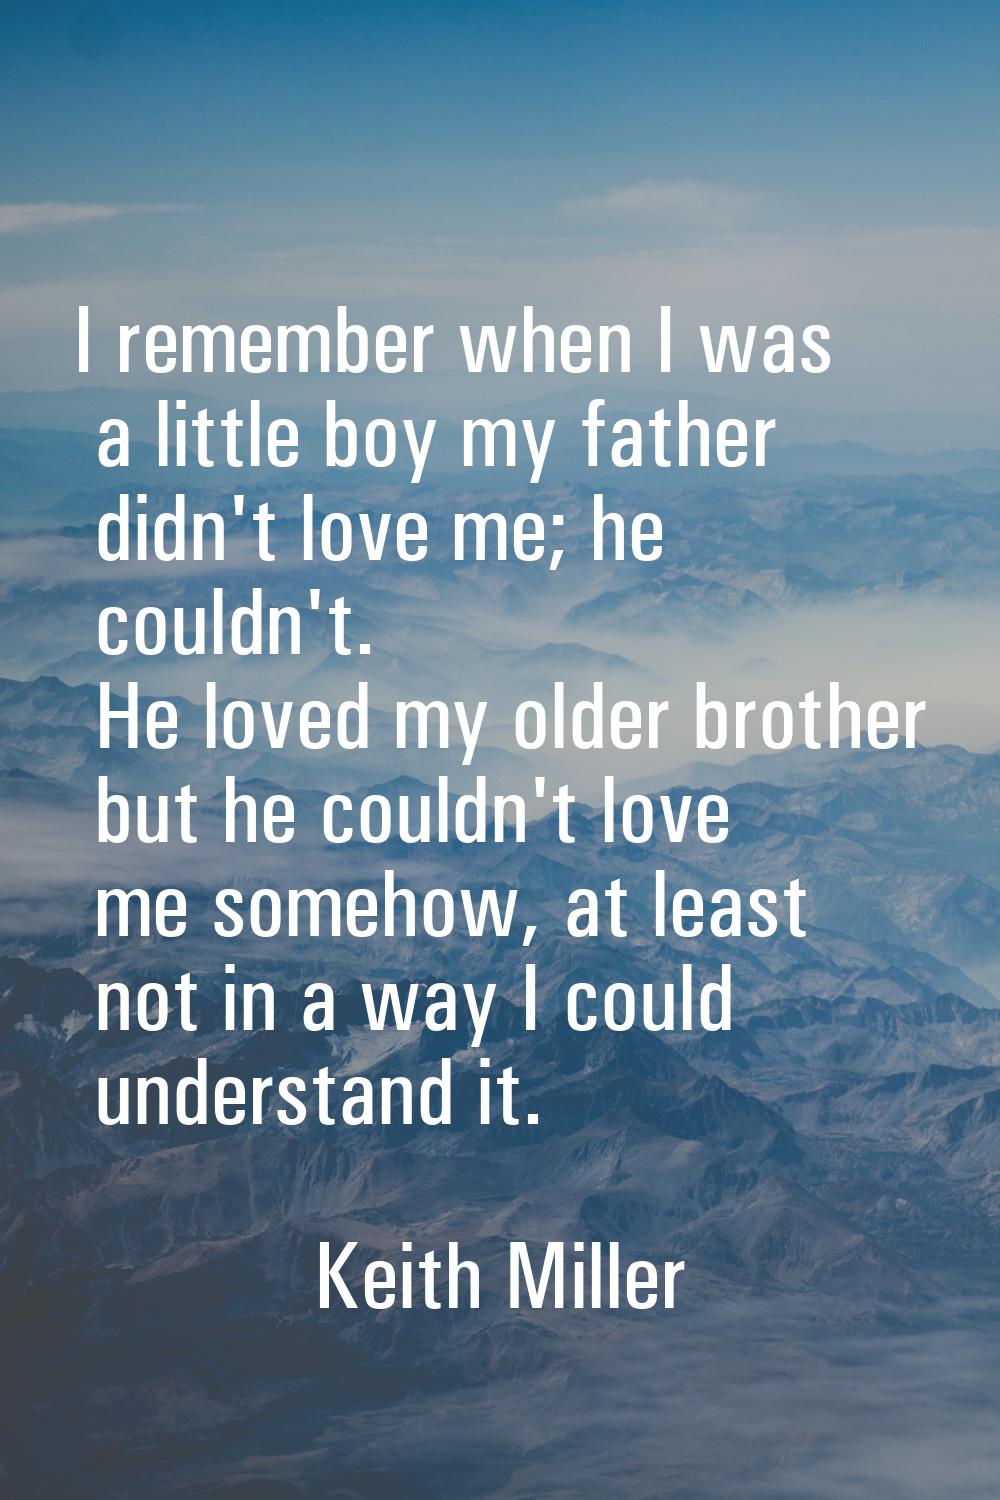 I remember when I was a little boy my father didn't love me; he couldn't. He loved my older brother